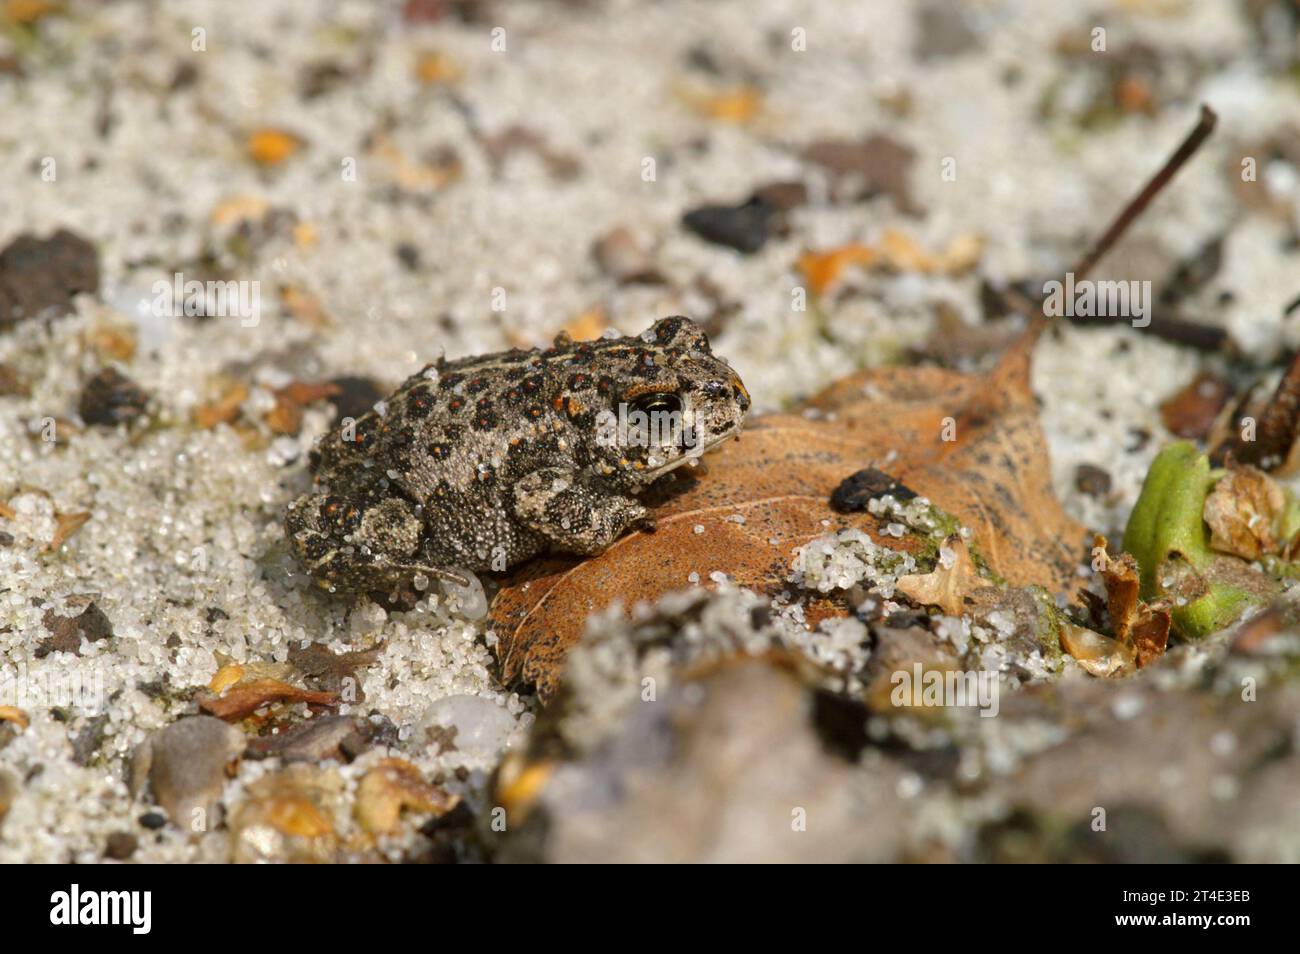 Natural closeup on a small juvenile of the endangered European Natterjack toad, Bufo calamita sitting on the ground Stock Photo